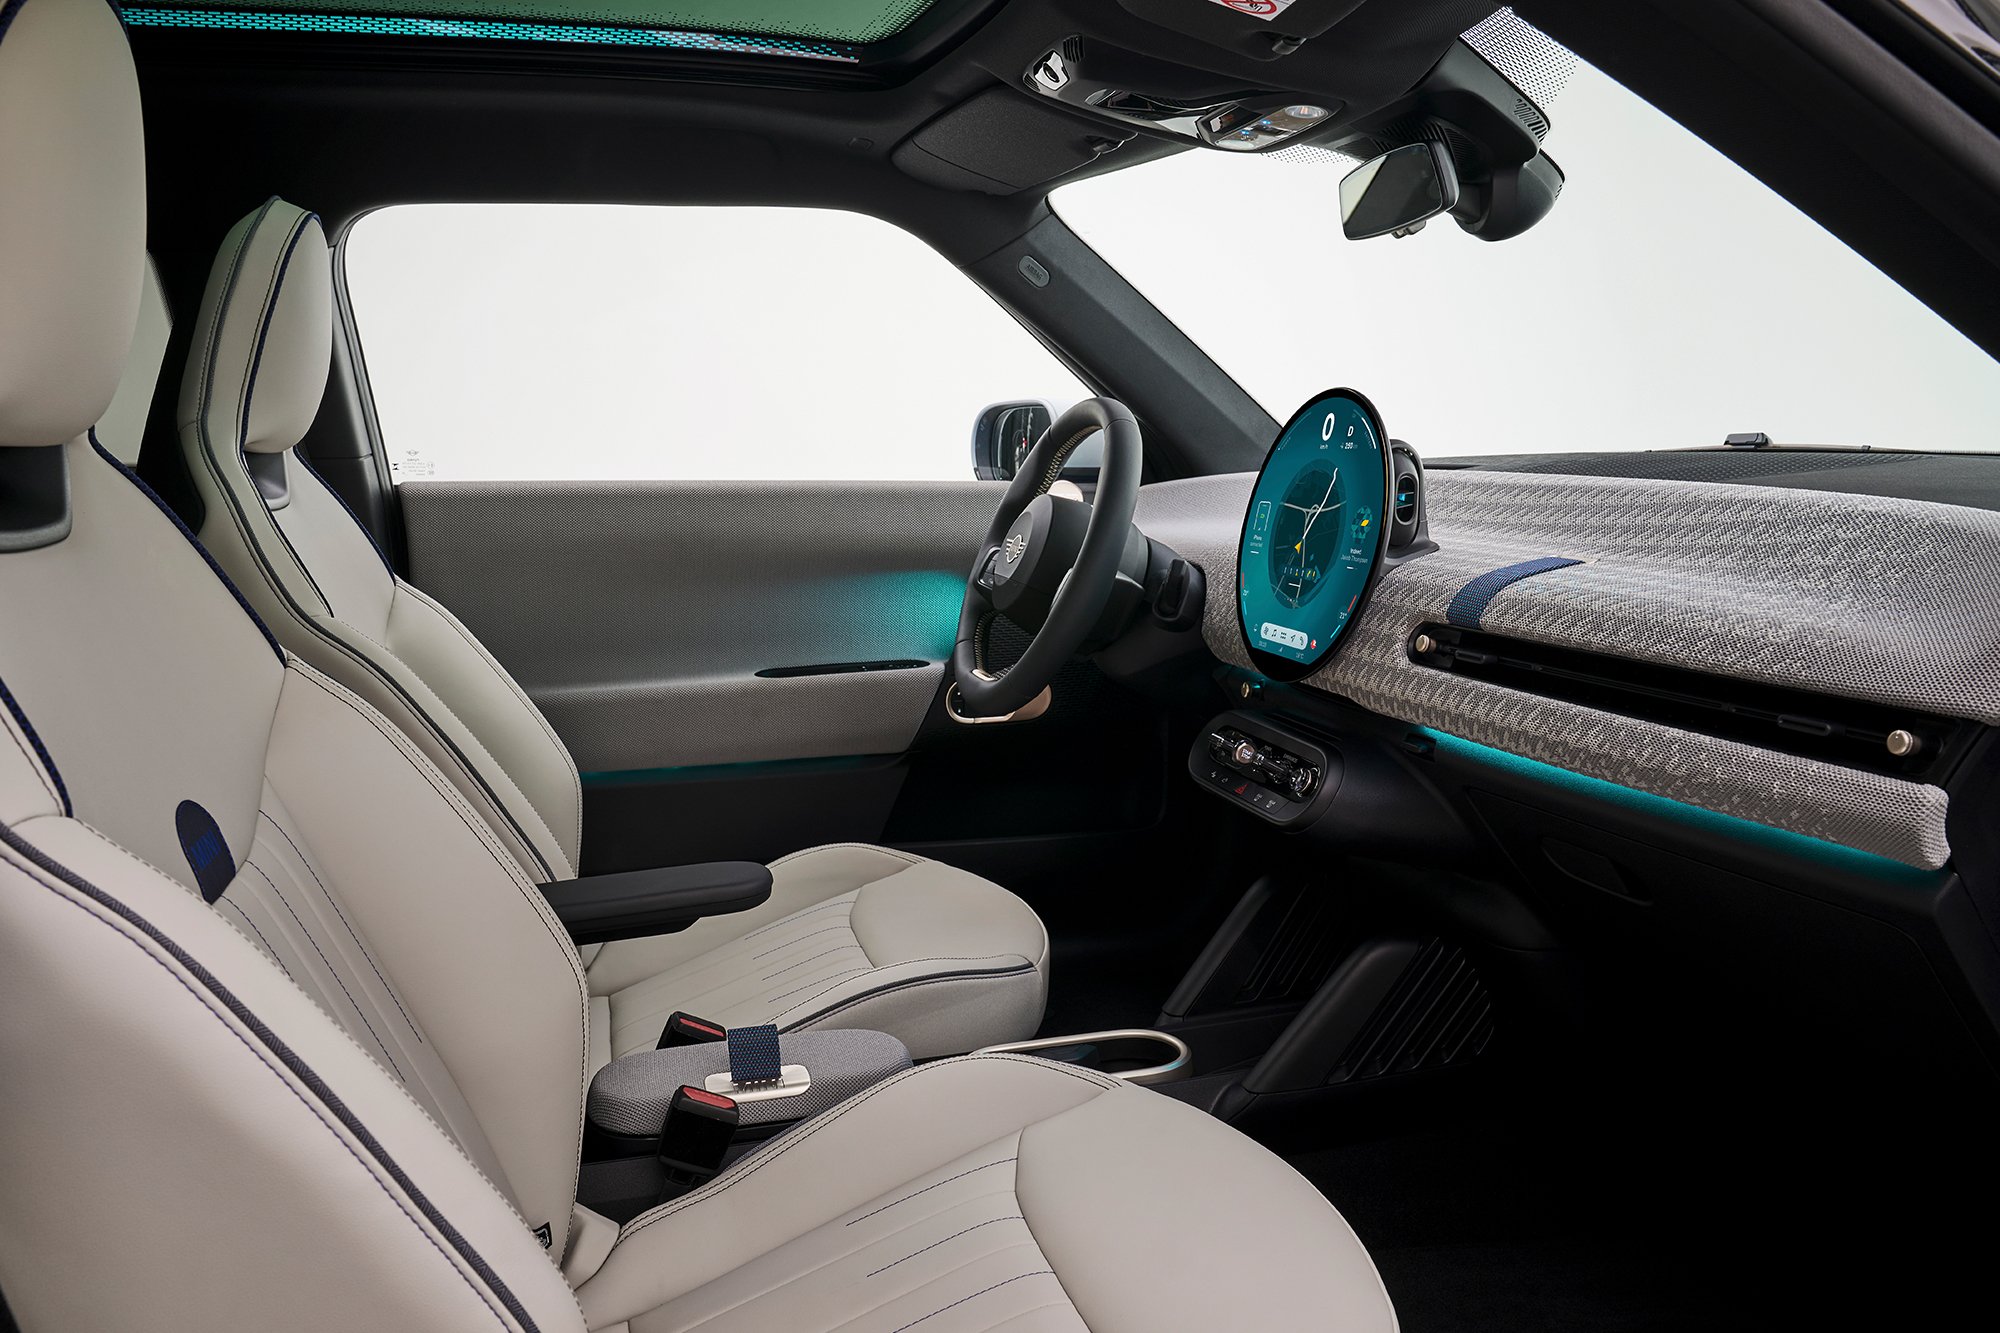 The front seat and dashboard design of the new all-electric MINI Cooper 